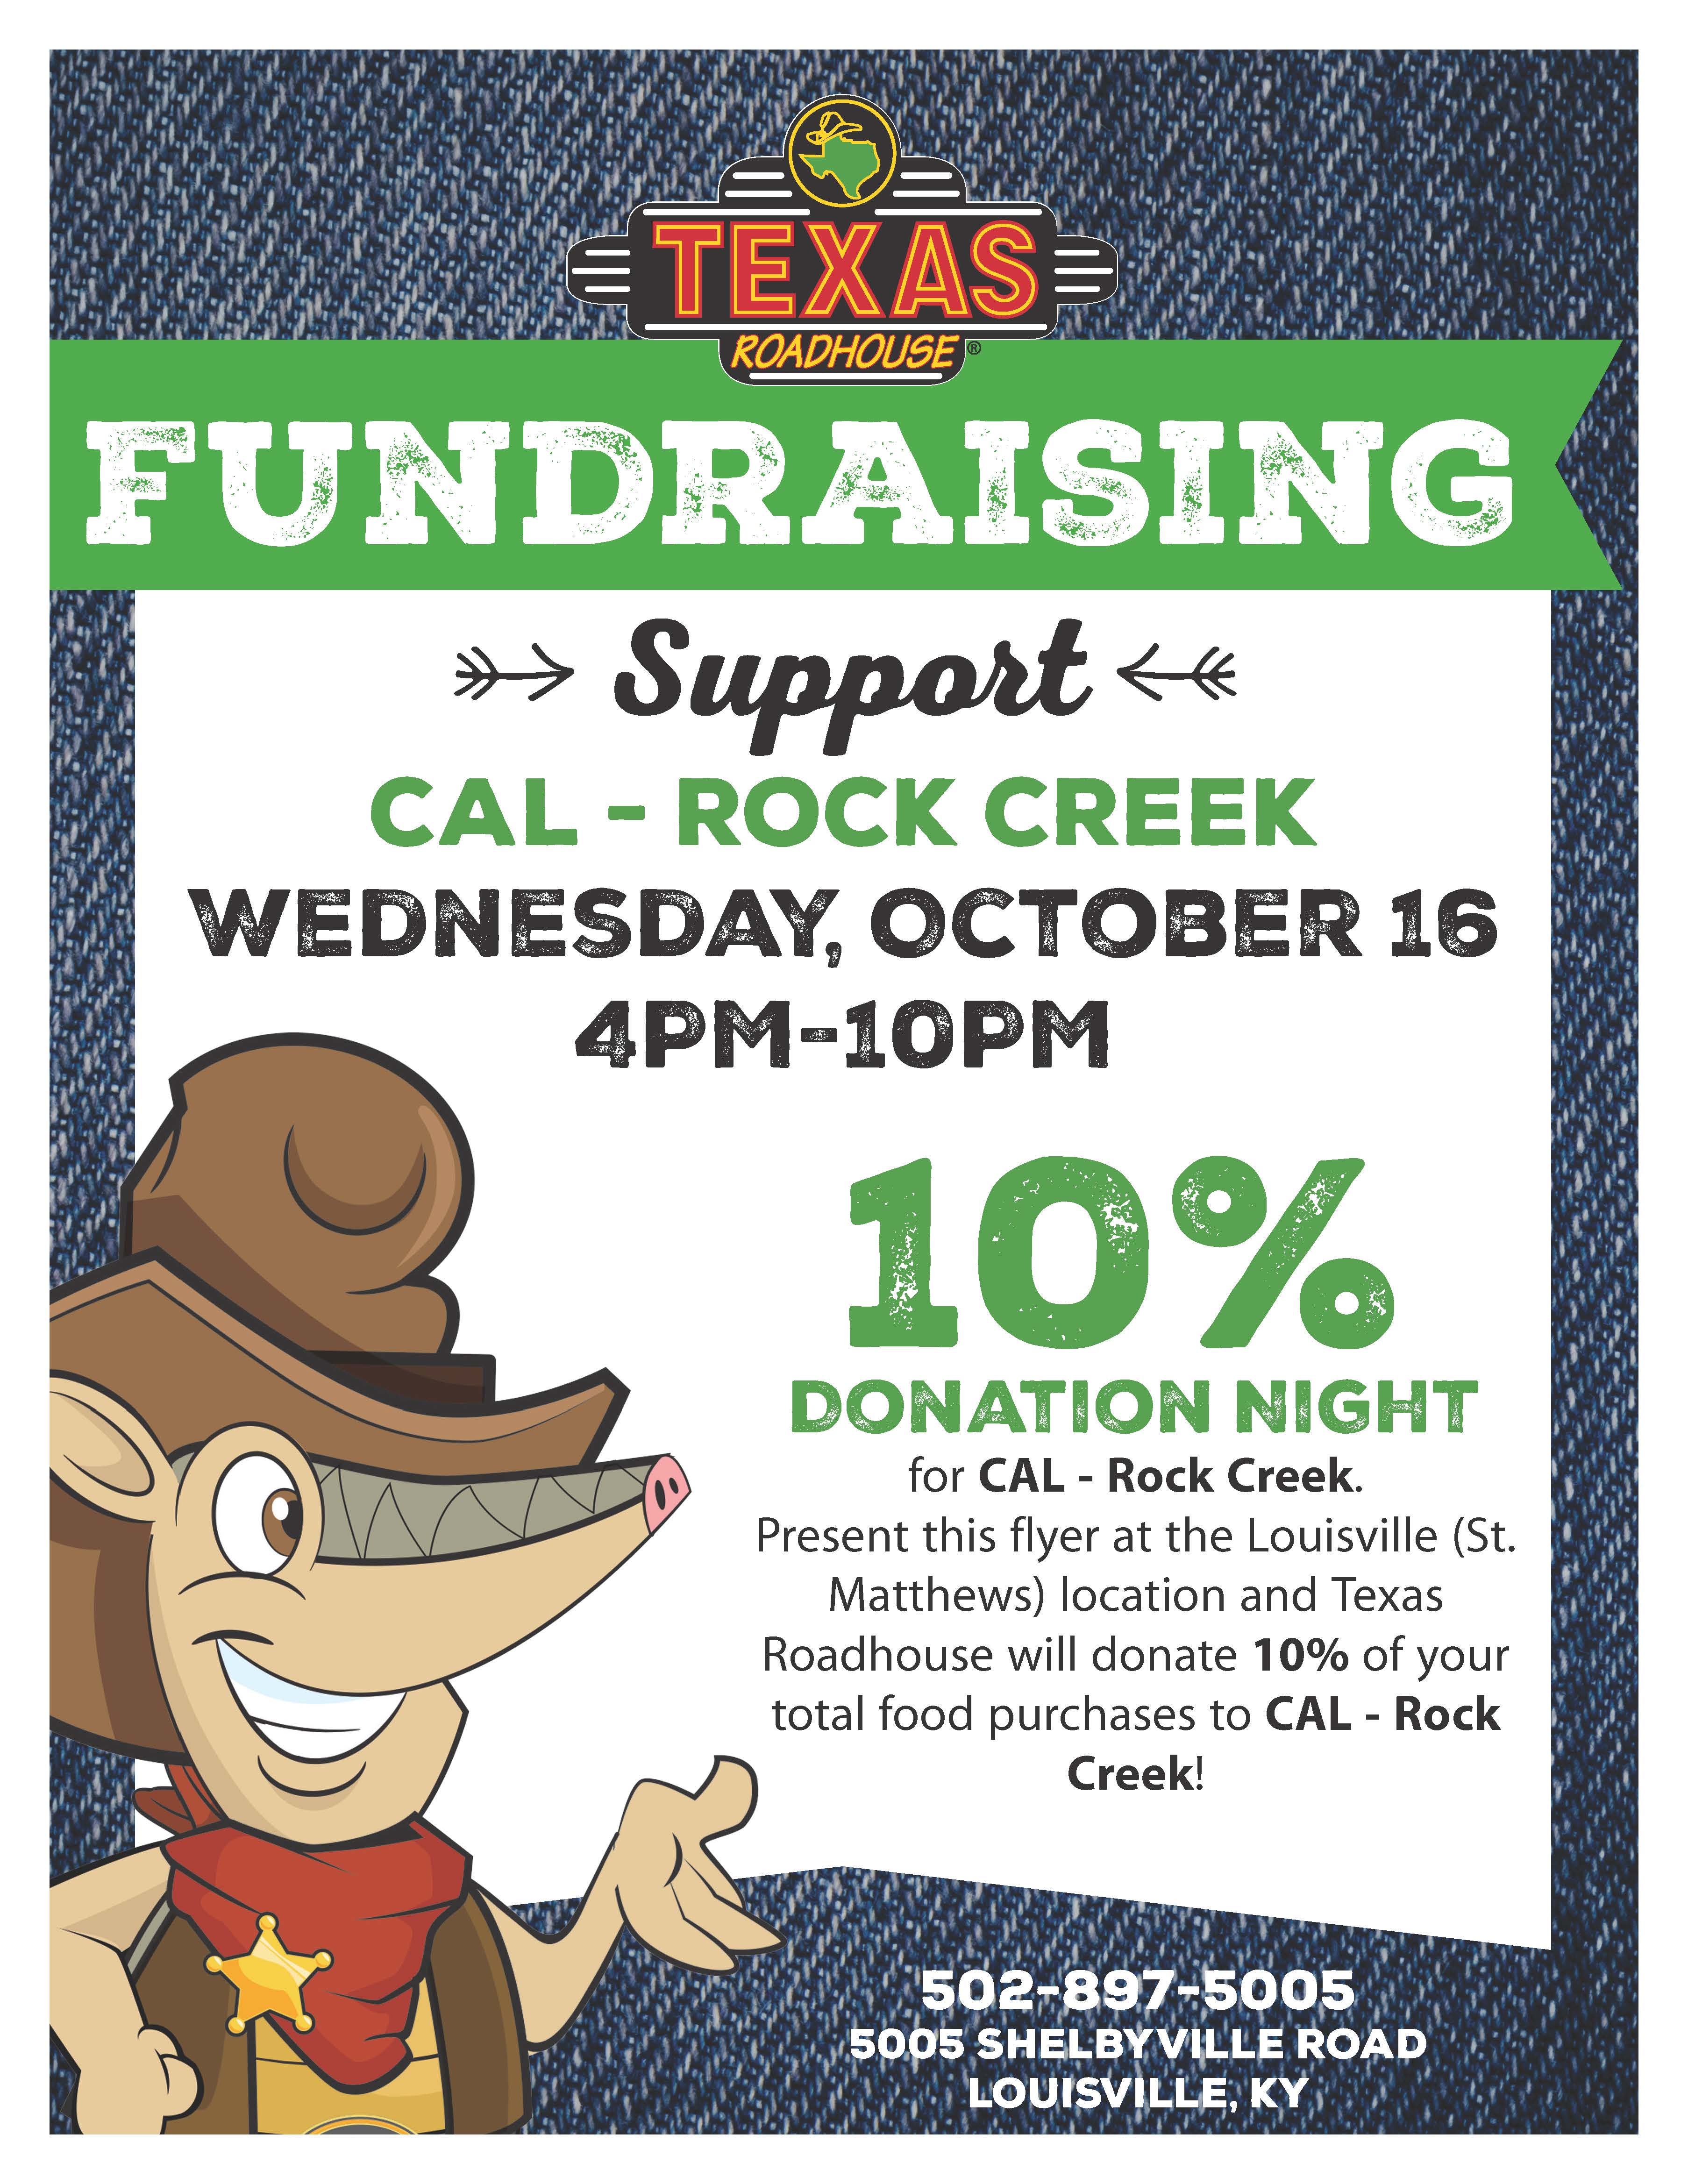 Christian Academy School System | Christian Academy of Louisville | Rock Creek Campus | Texas Roadhouse Fundraising | October 16